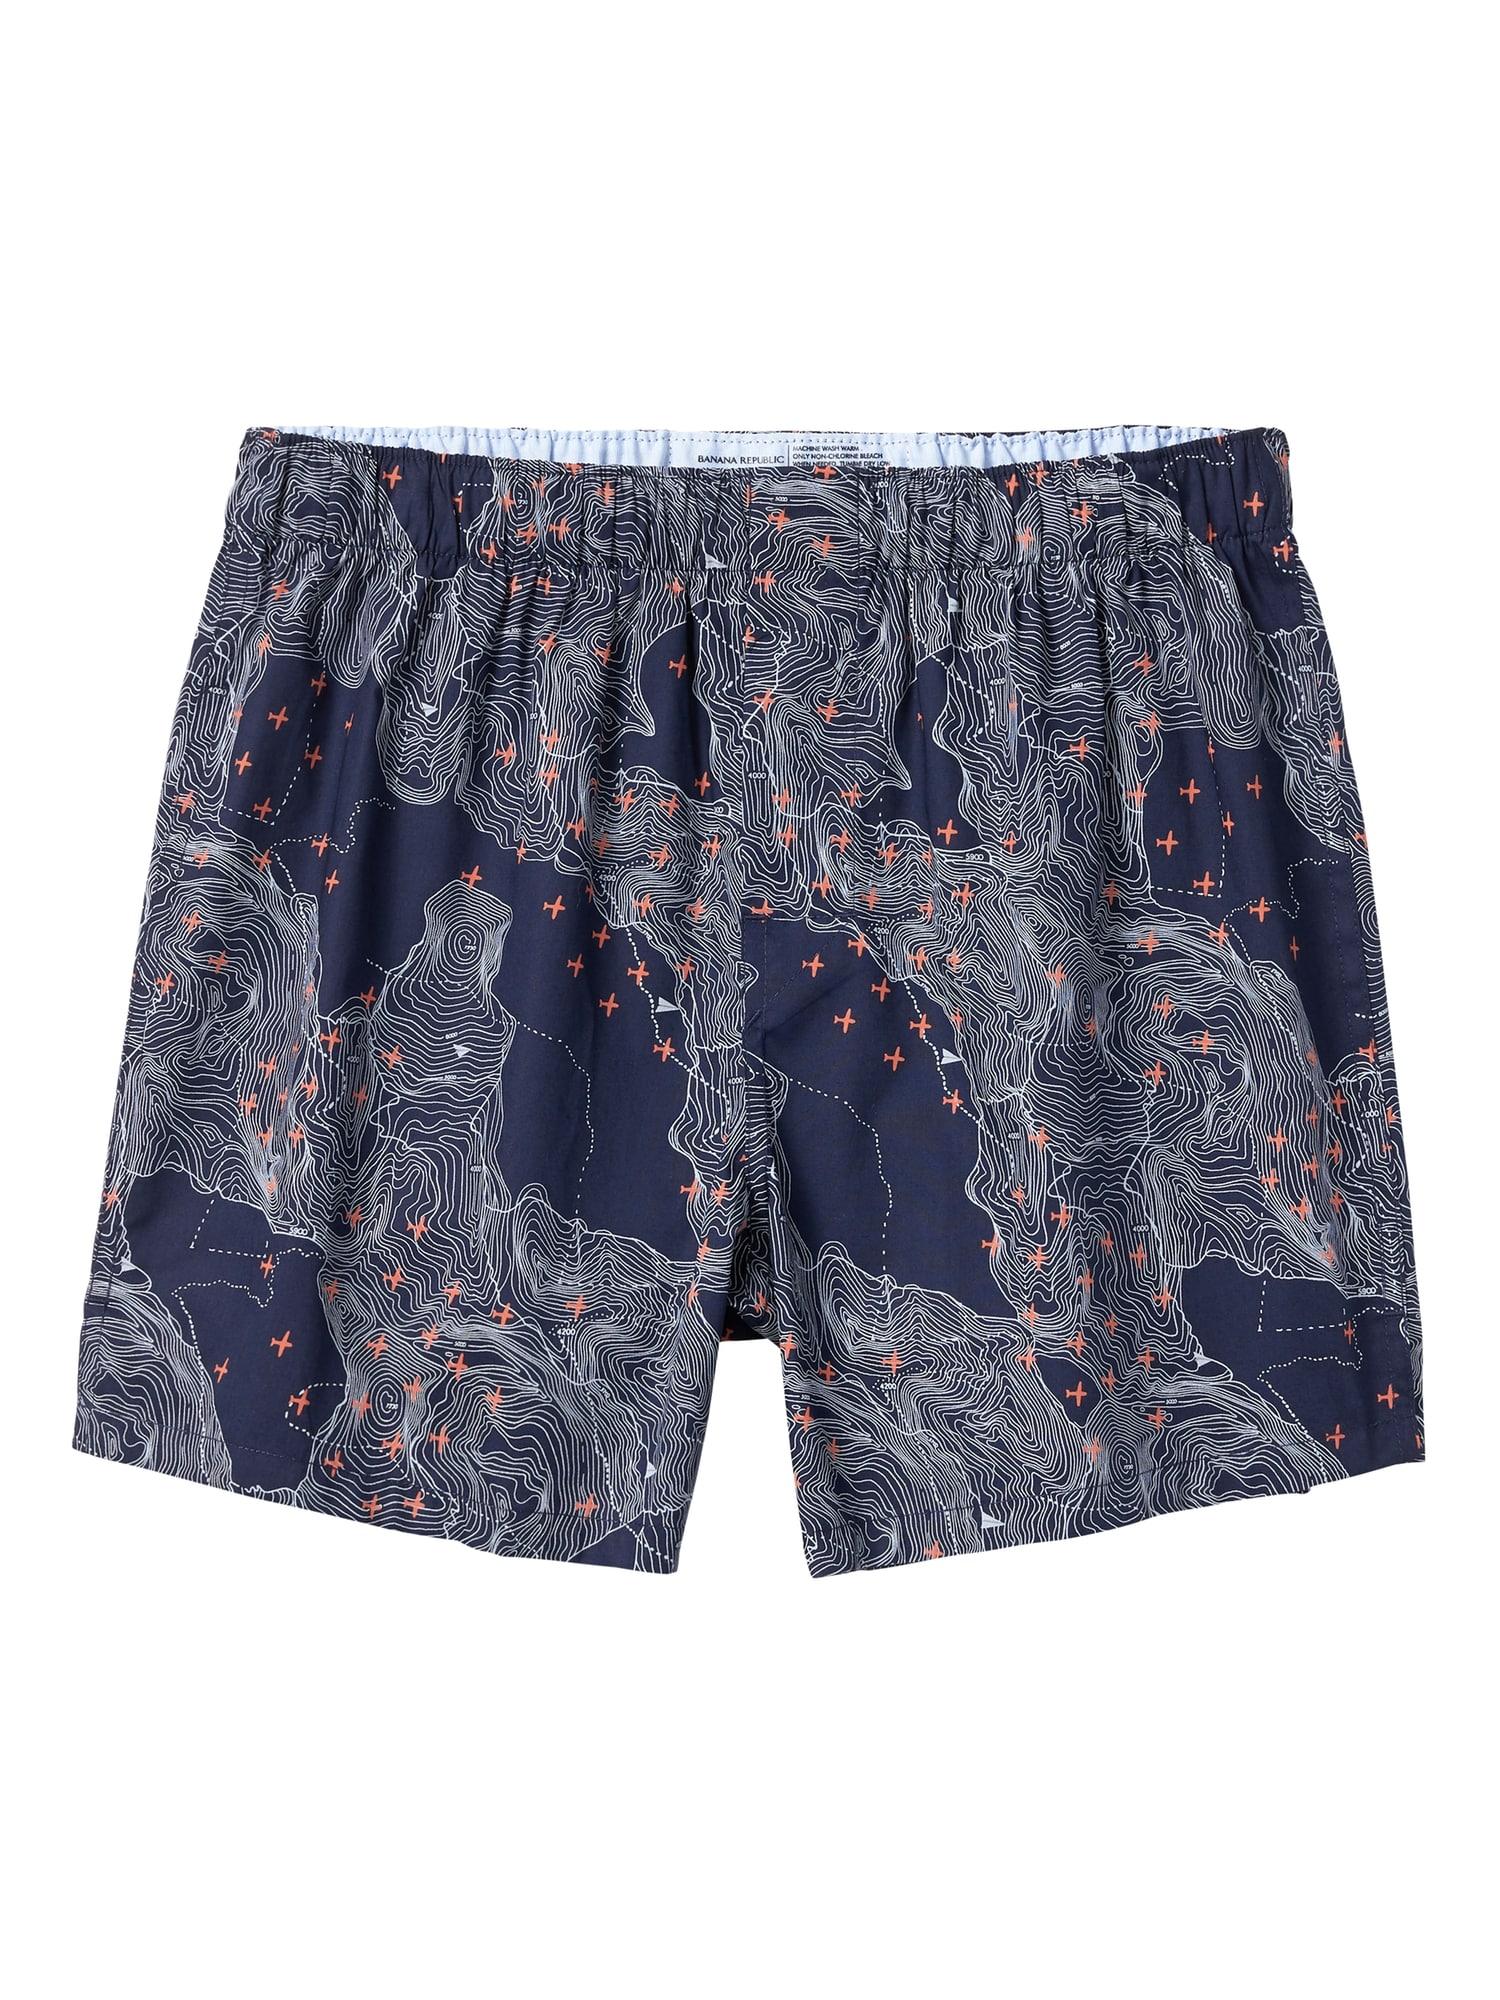 Banana Republic Cotton Airplane Map Boxer in Navy (Blue) for Men - Lyst